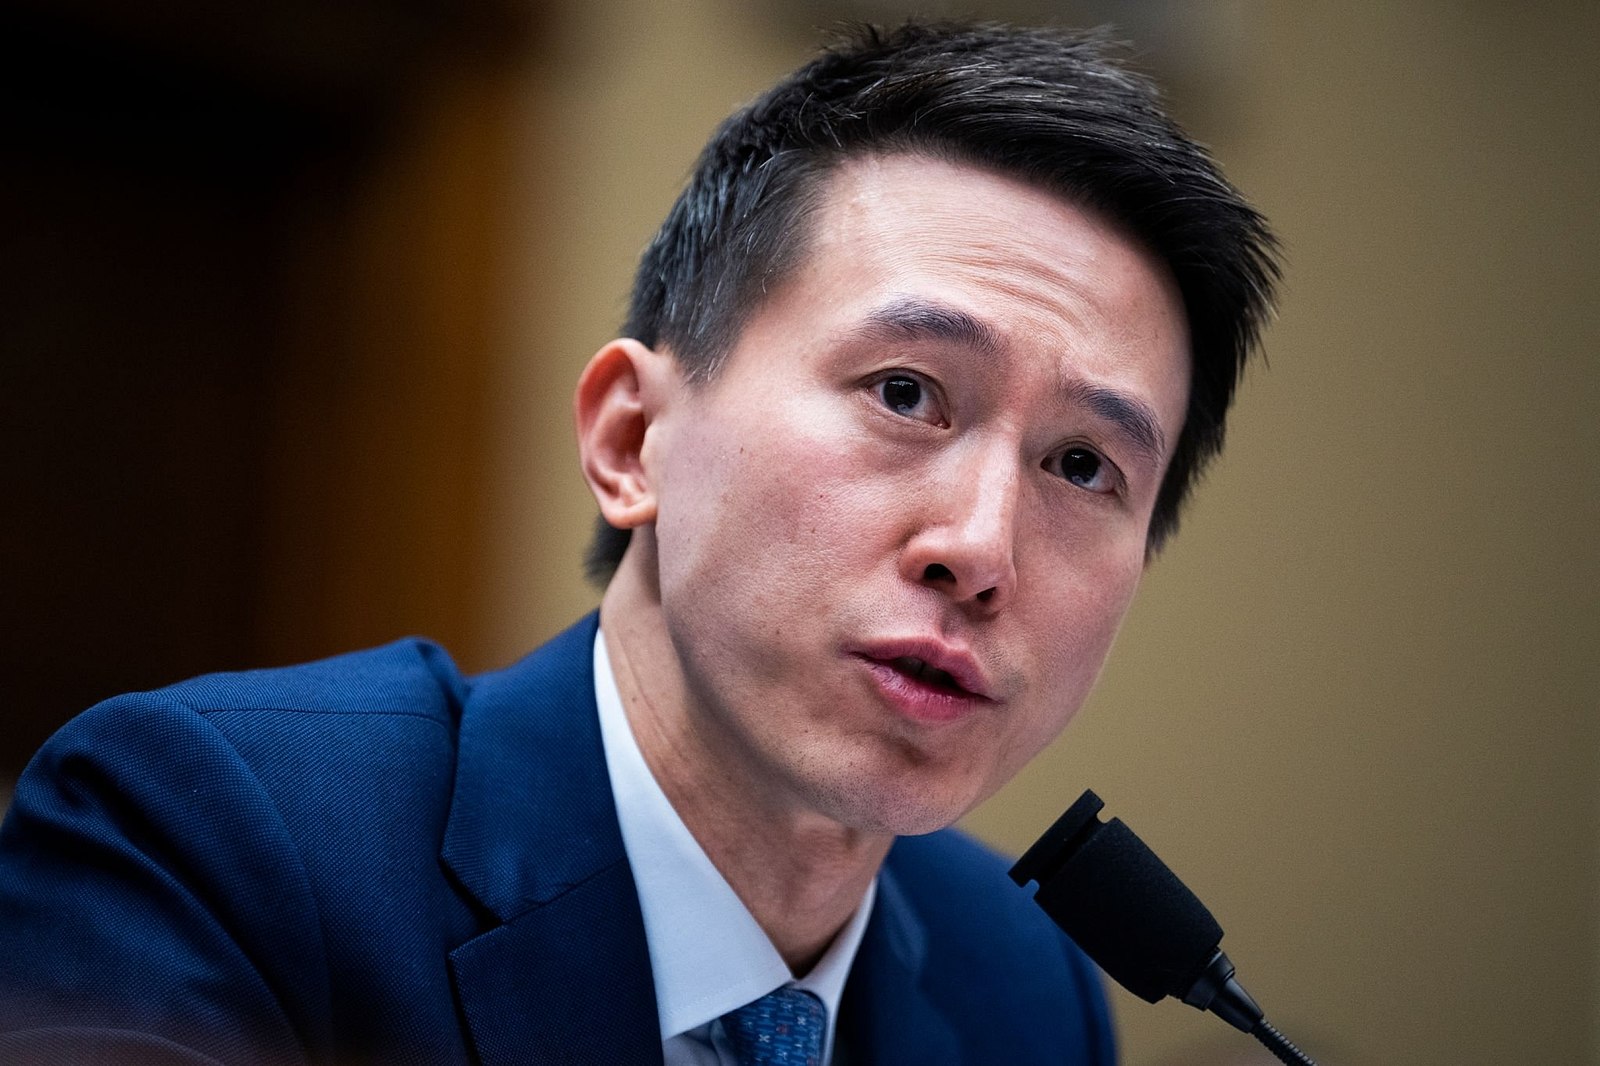 CEO of TikTok, Shou Chew, being questioned by members of Congress